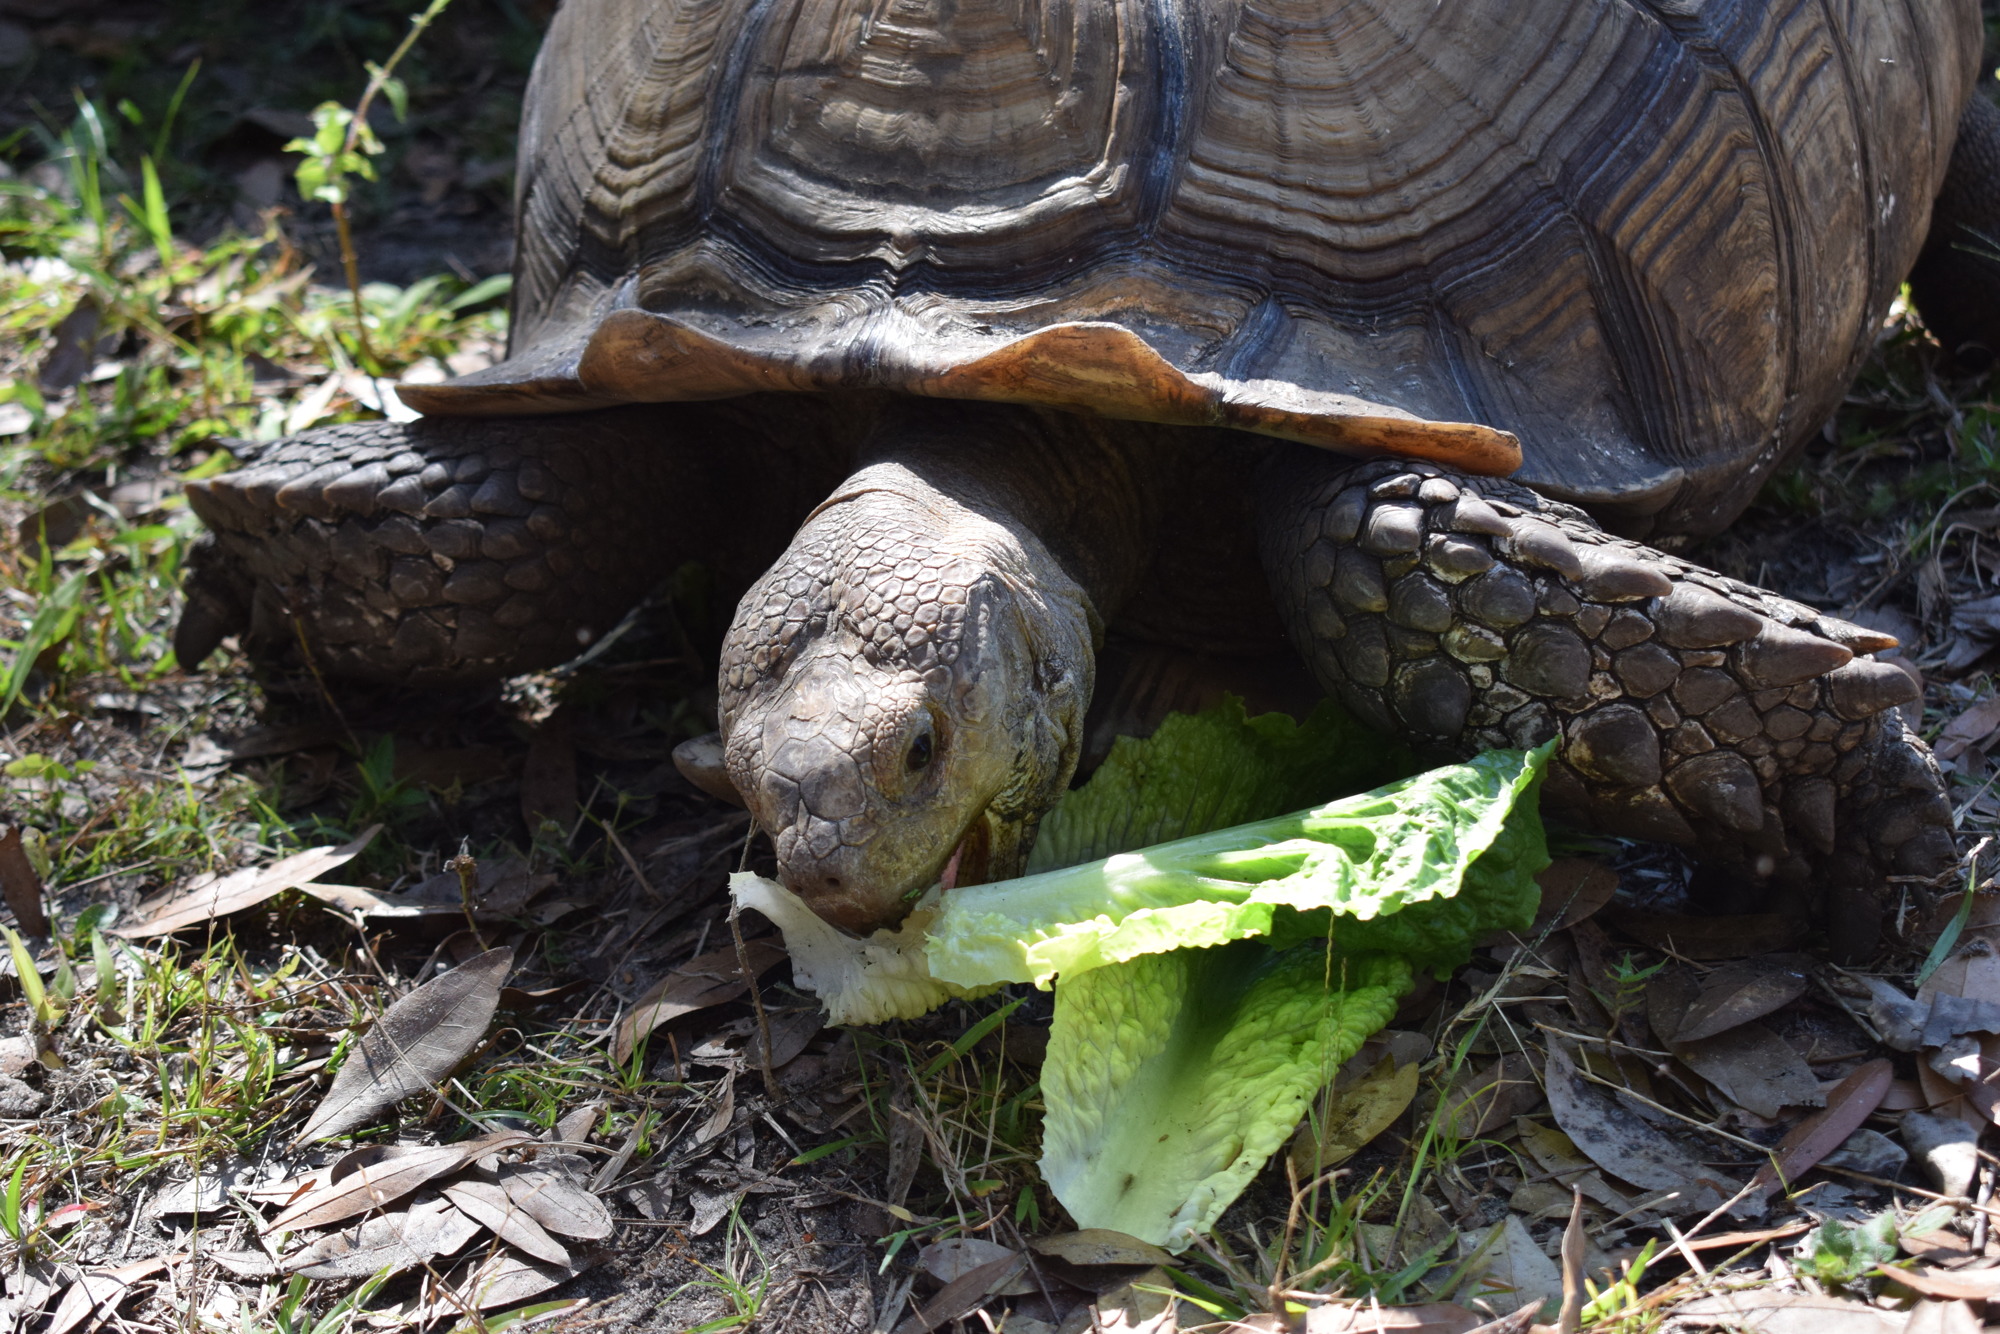 George the tortoise loves lettuce. All the animals have special diets.